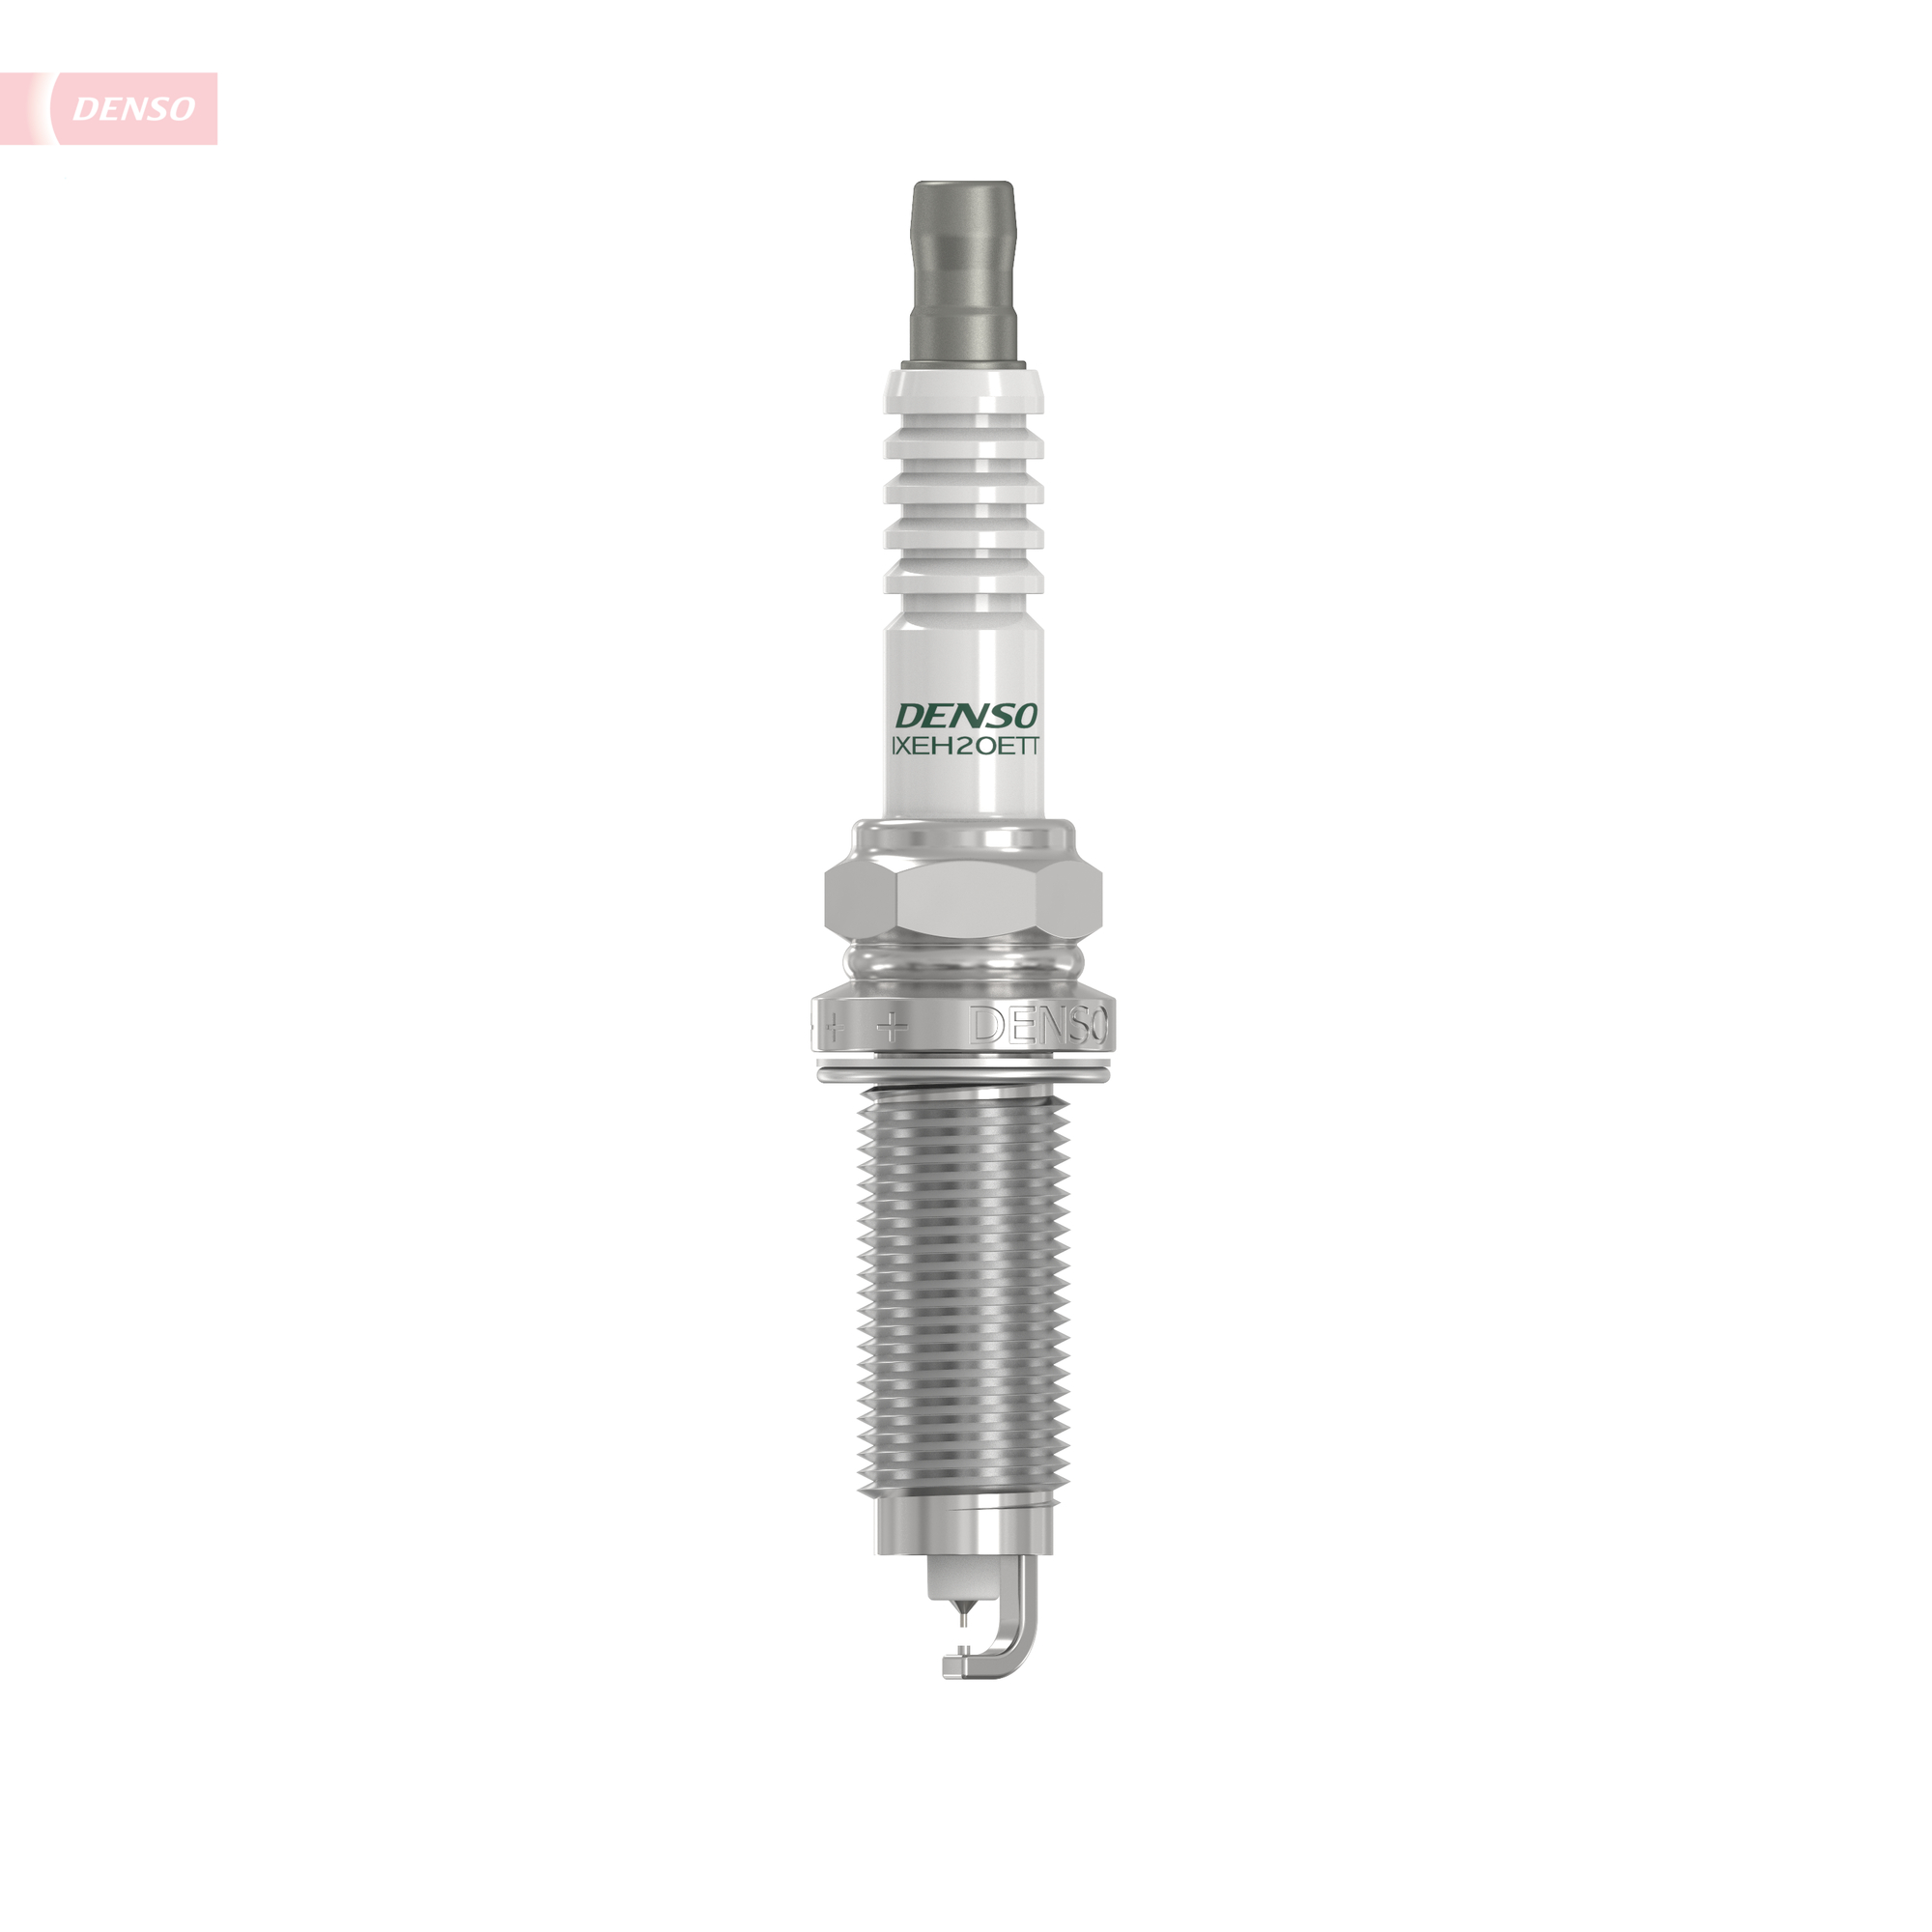 Picture of DENSO - IXEH20ETT - Spark Plug (Ignition System)